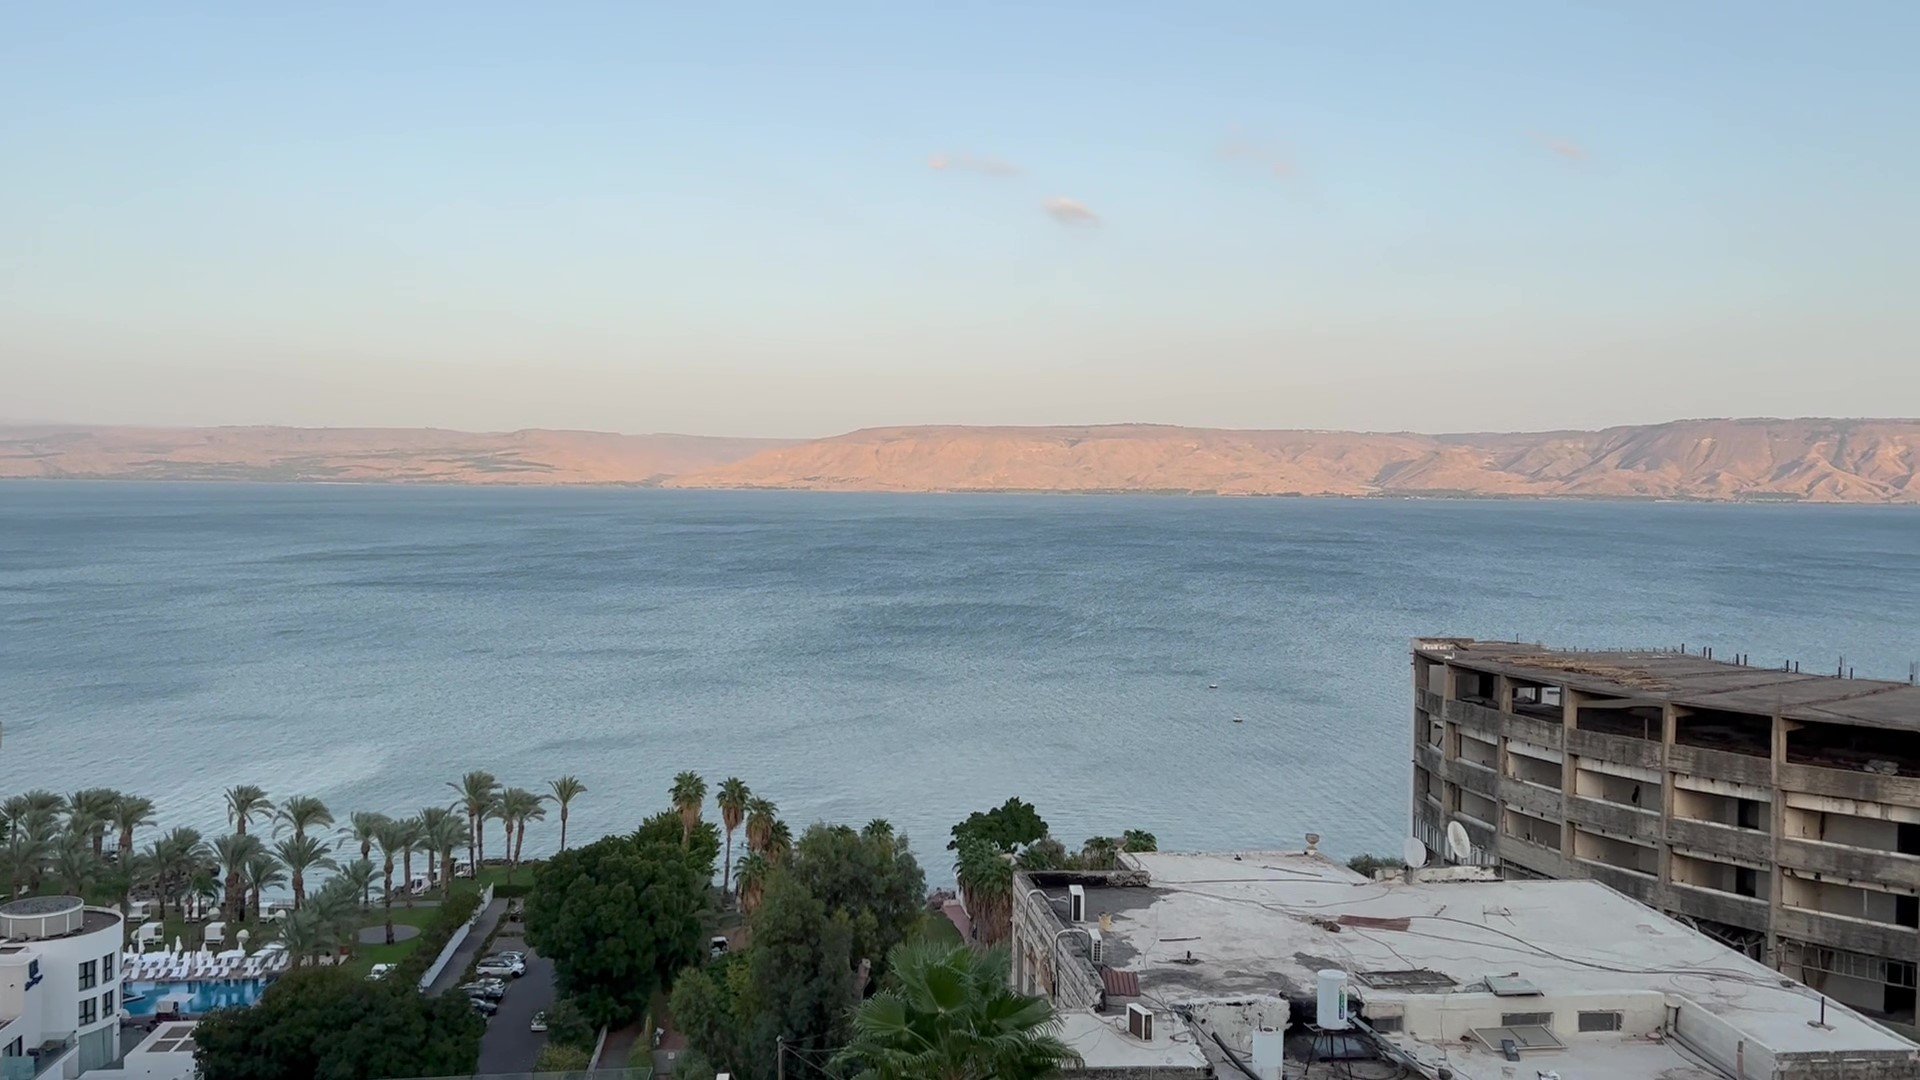 Sea of Galilee from Hotel